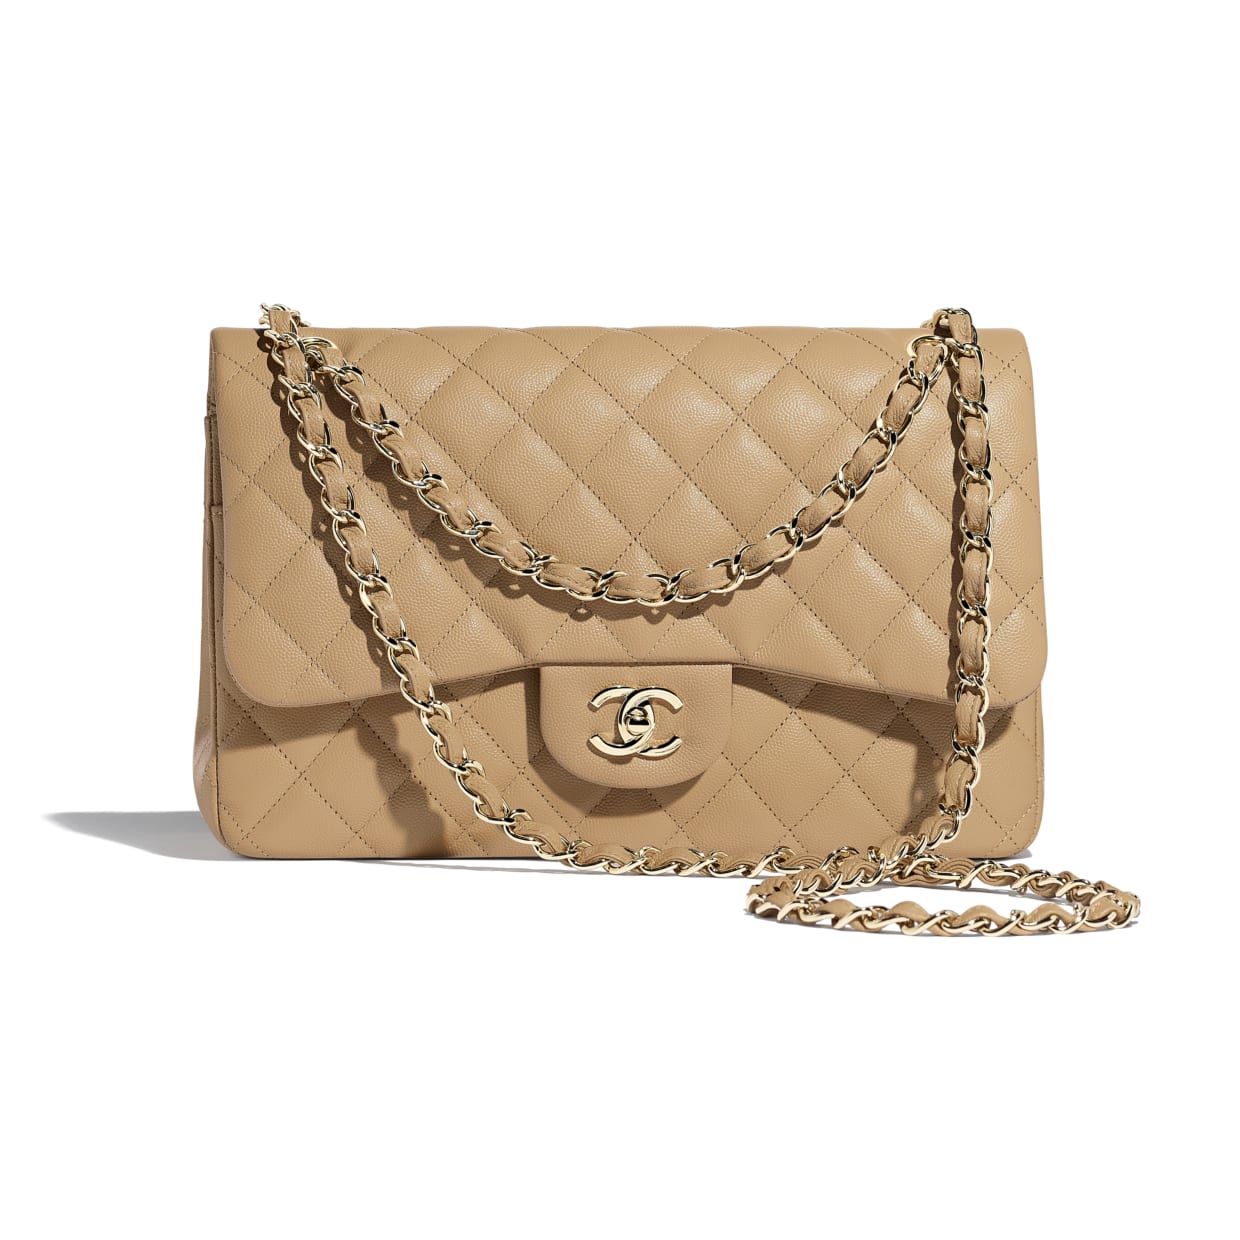 Chanel Classic Bag Price Increases 